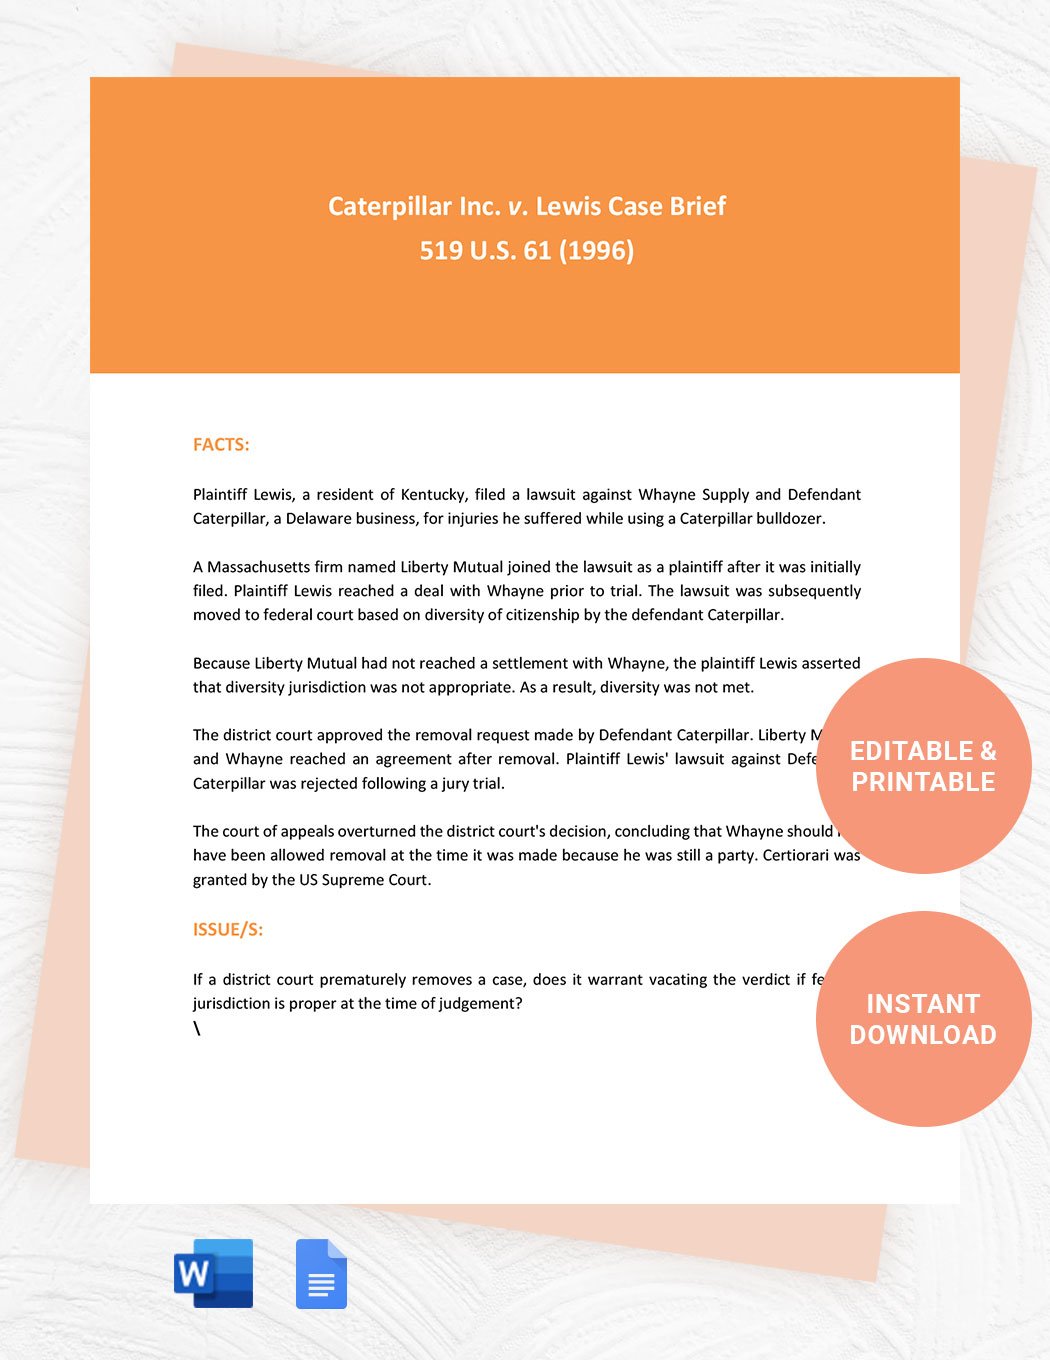 Legal Case Brief Outline Template in Word, Google Docs